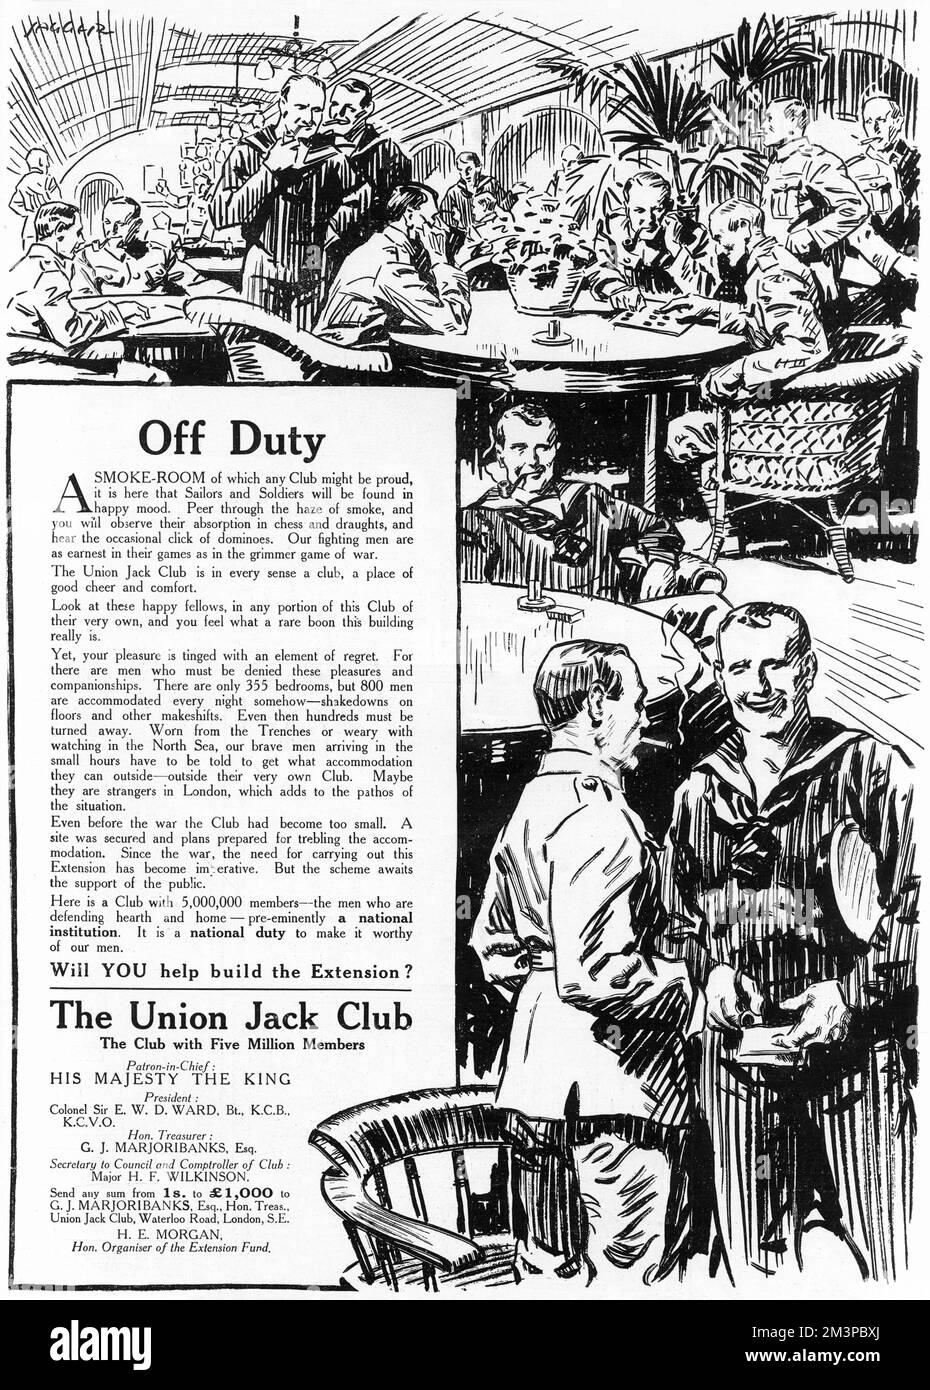 Advertisement in The Sphere, asking for donations towards an extension to the Union Jack Club of Waterloo Road, London during the First World War. The Union Jack Club was founded in 1907 as a place for servicemen of all nationalities to stay while in London. The appeal mentions that though the club had 355 bedrooms, it accommodated 800 men every night.  Illustration shows the smoke-room of the club with soldiers and sailors pictured relaxing  and playing board games among the haze of pipe and cigarette smoke.       Date: 1916 Stock Photo